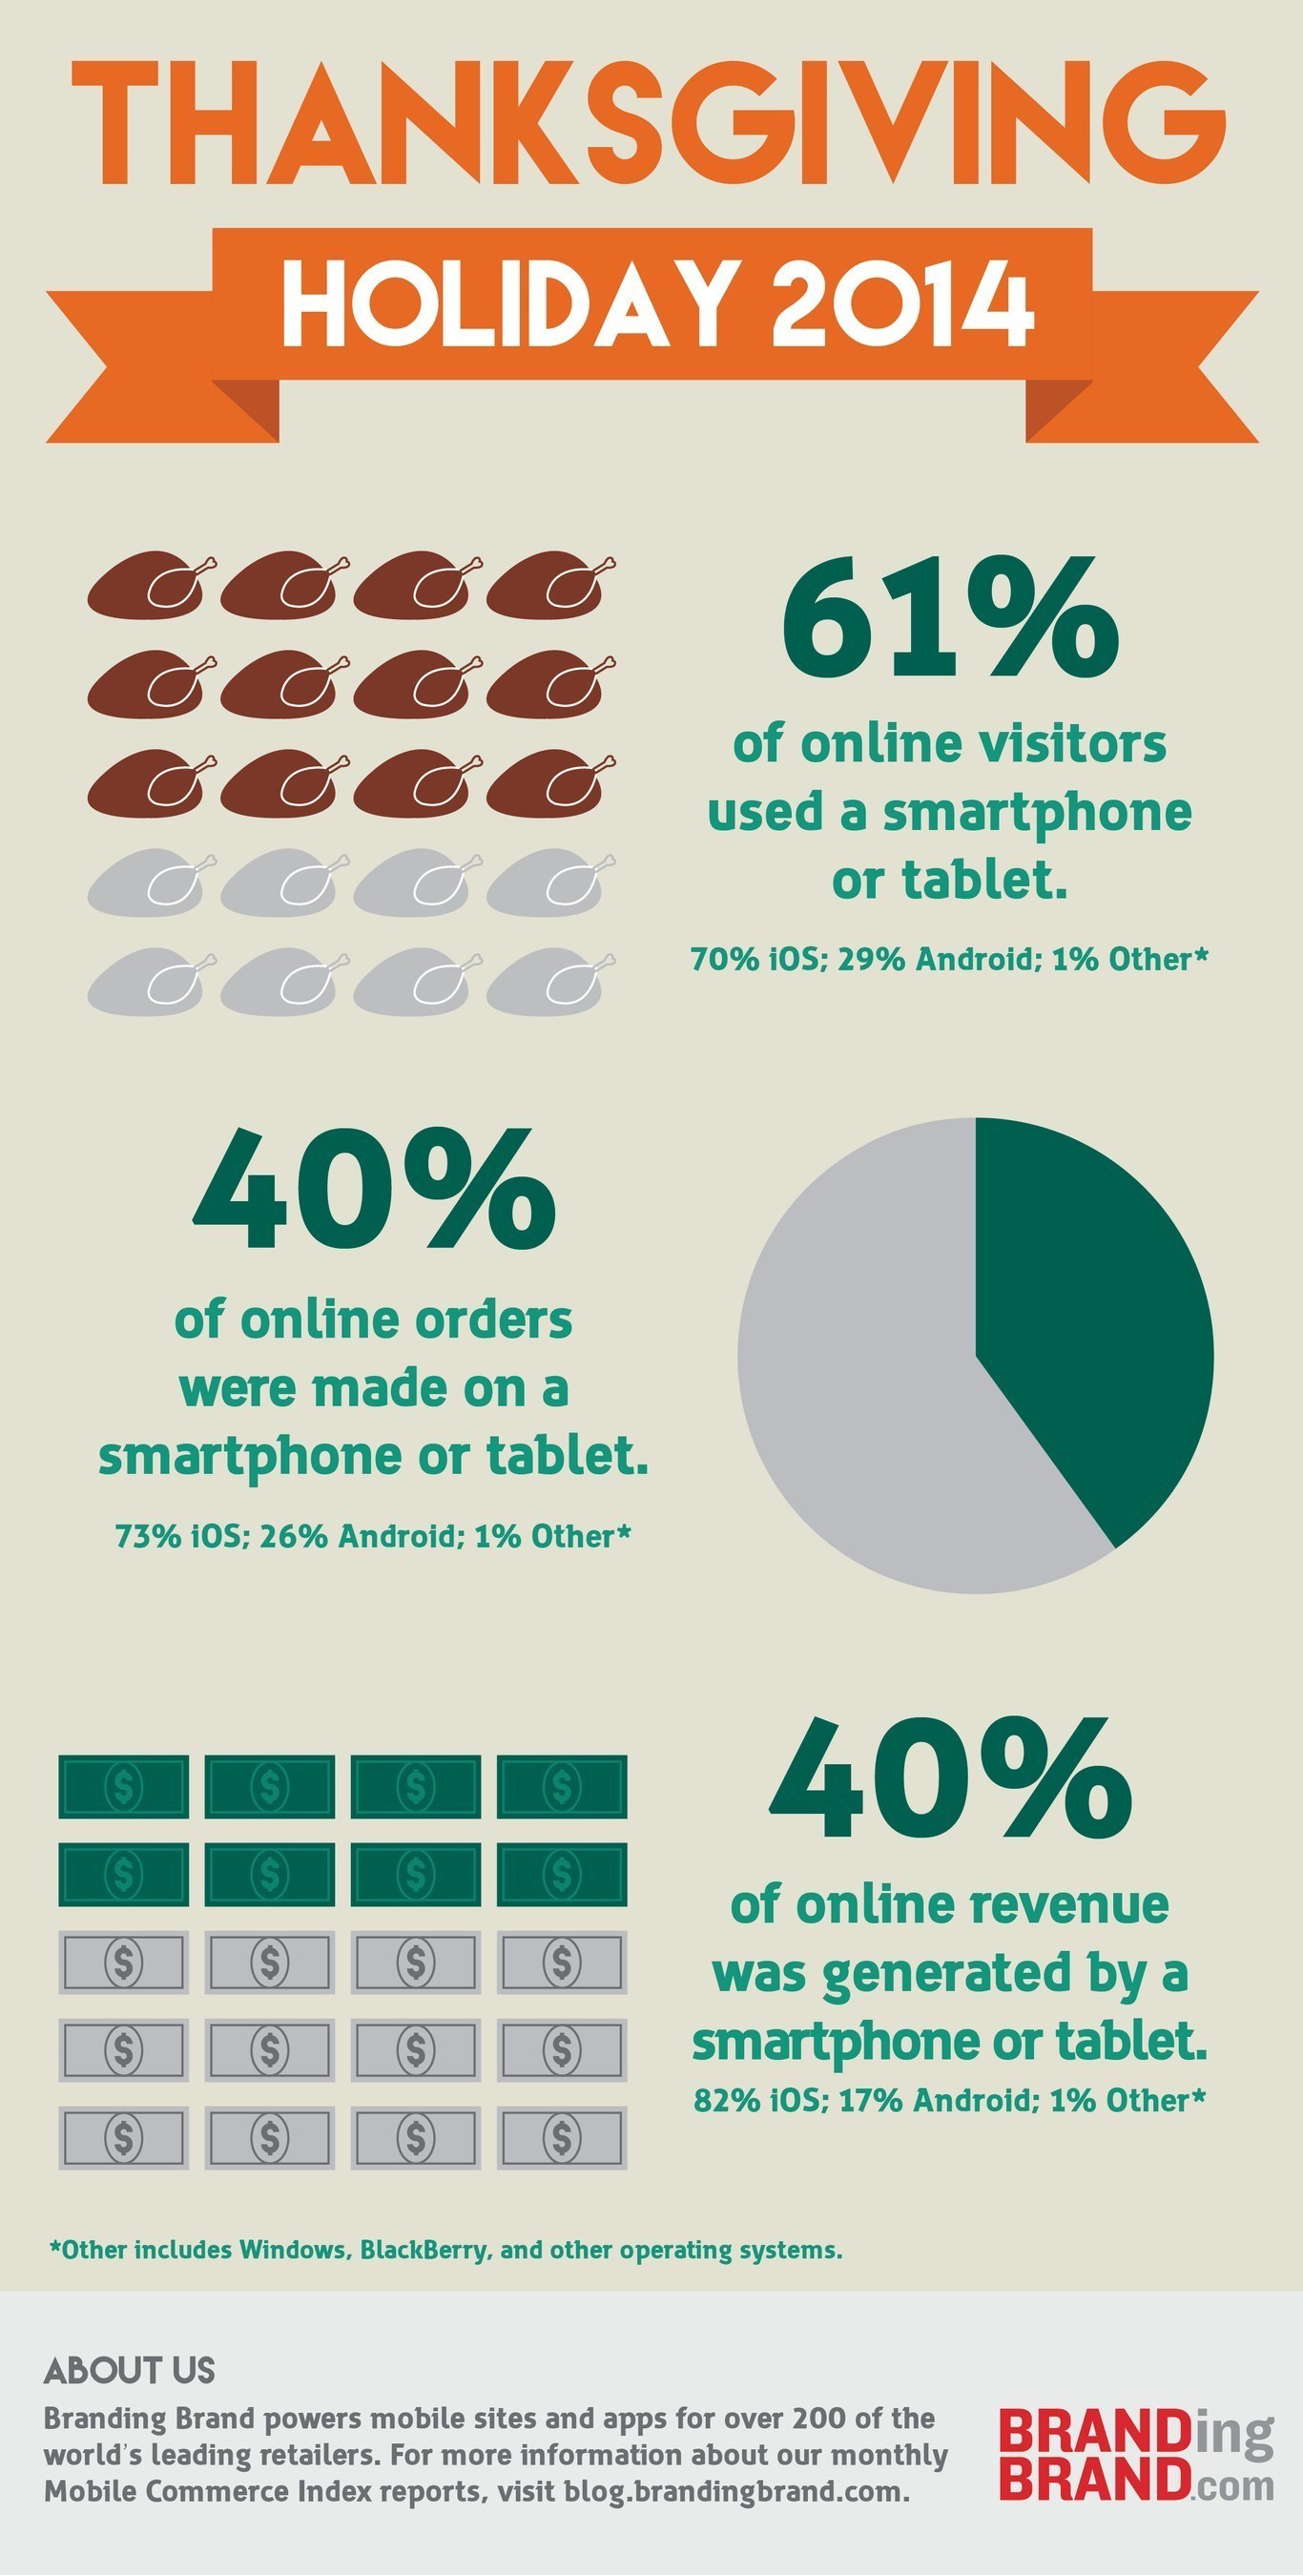 Thanksgiving 2014: 3 out of 5 Online Shoppers Were Mobile